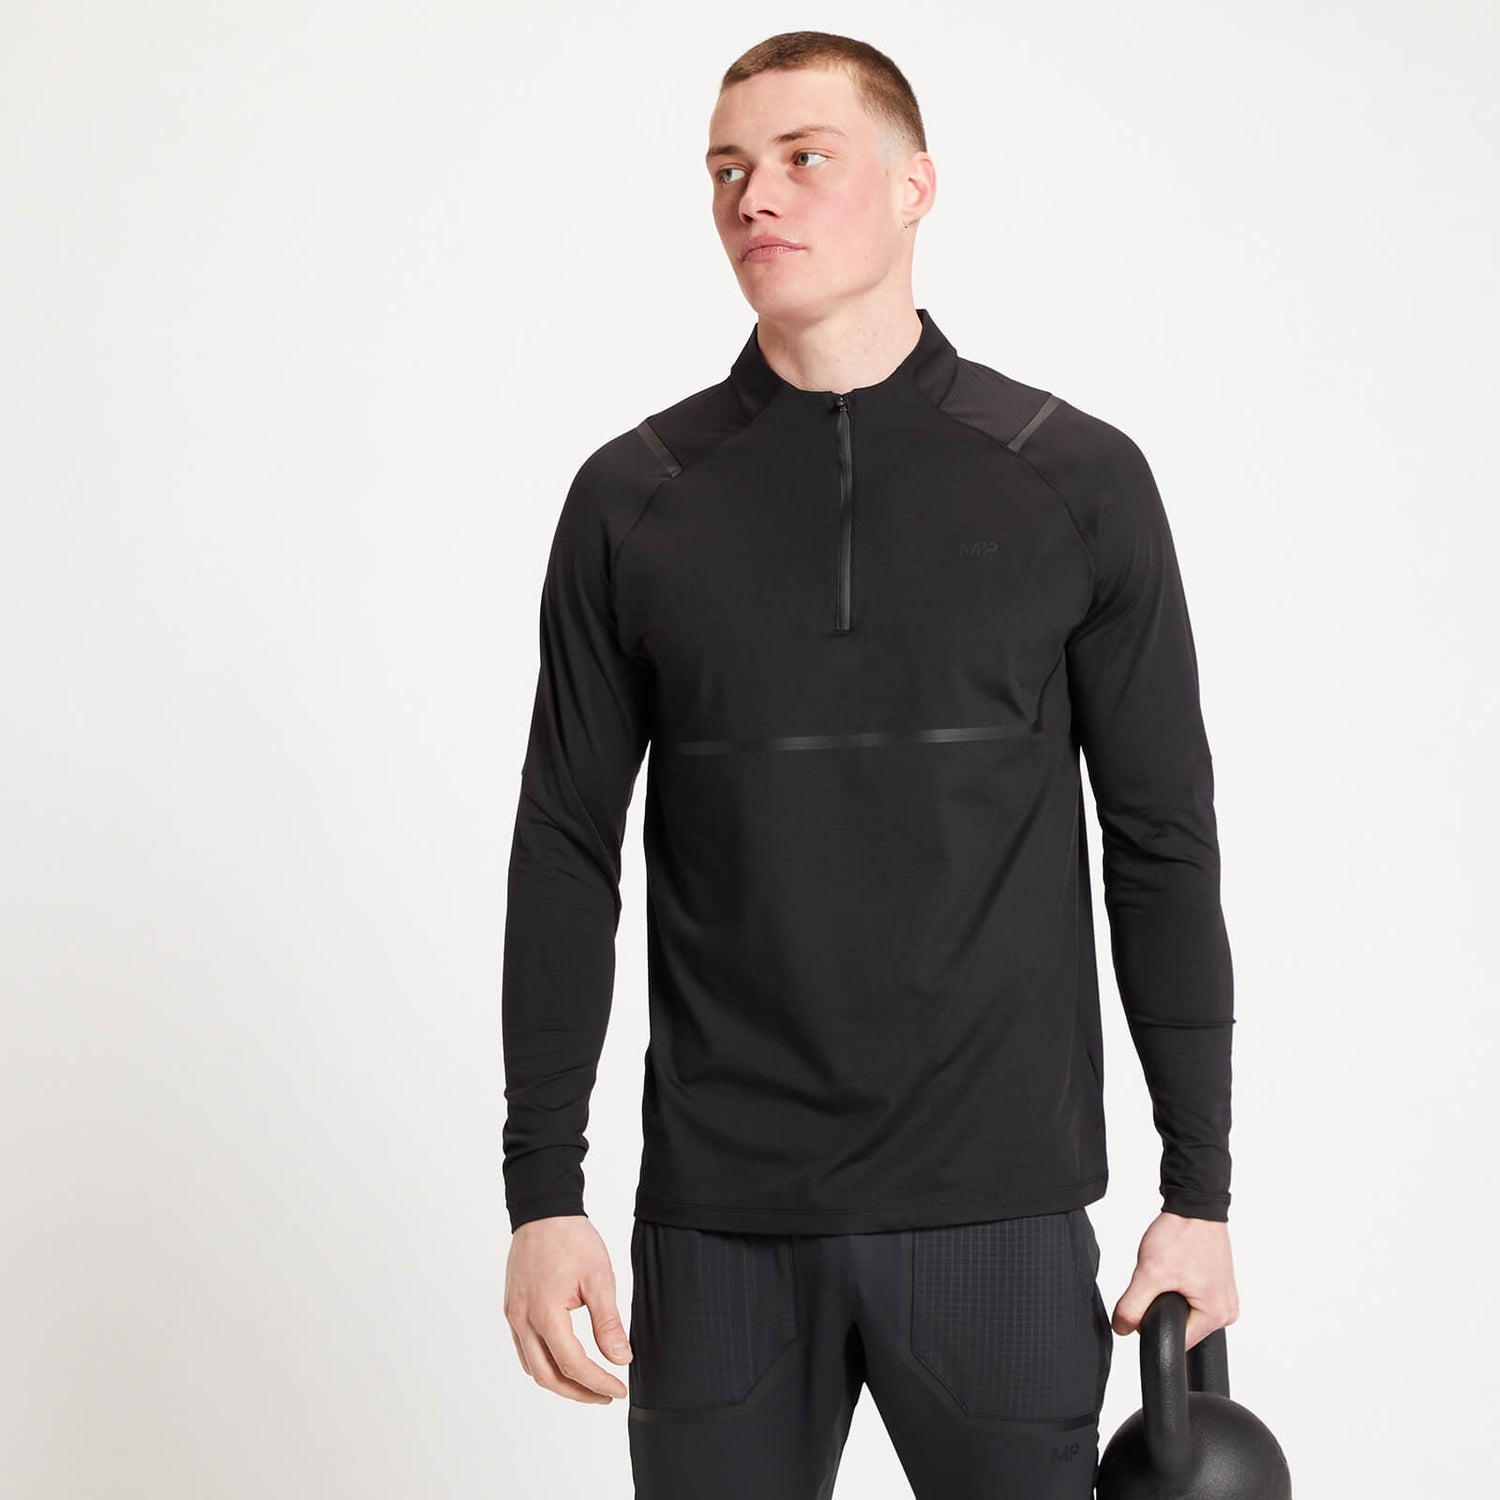 Limited Edition MP Mænds Tempo Ultra 1/4 Zip Top - Sort